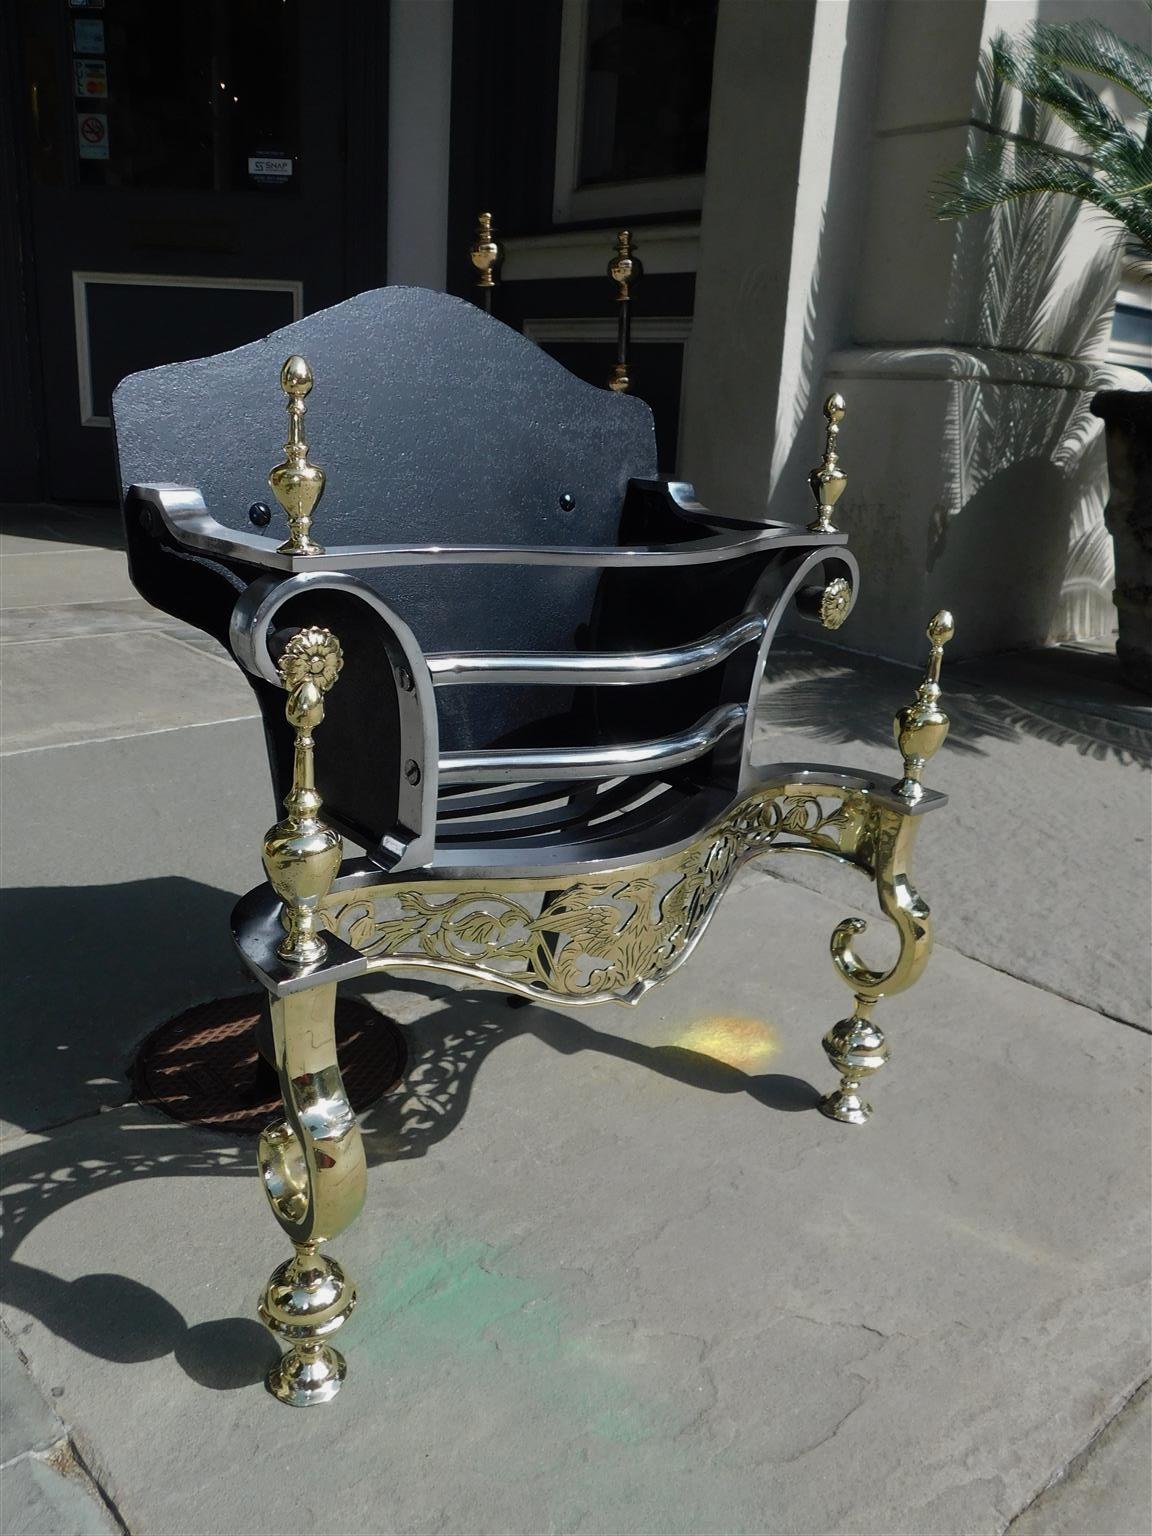 American brass and polished steel fire coal grate with flanking urn finials, floral medallions, hand chased foliage and eagle gallery, serpentine cast iron back, and resting on scrolled bulbous legs. Early 19th century.